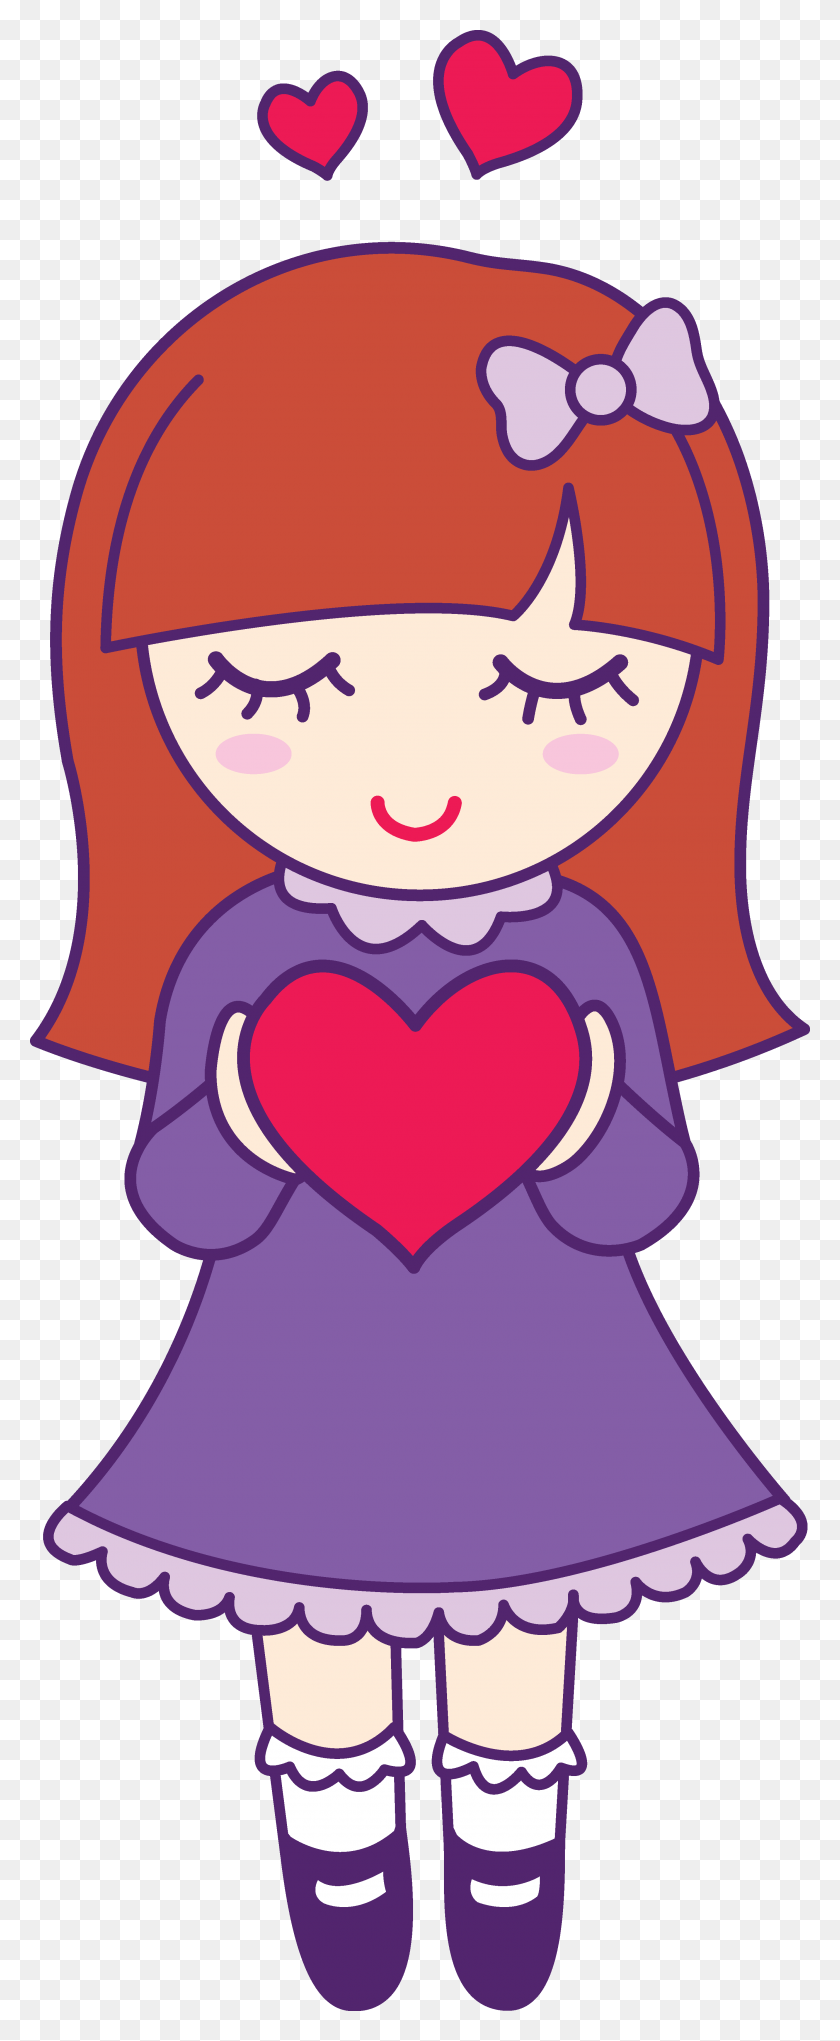 2798x7107 Cute Valentines Day Clip Art - Valentines Day Images Clip Art